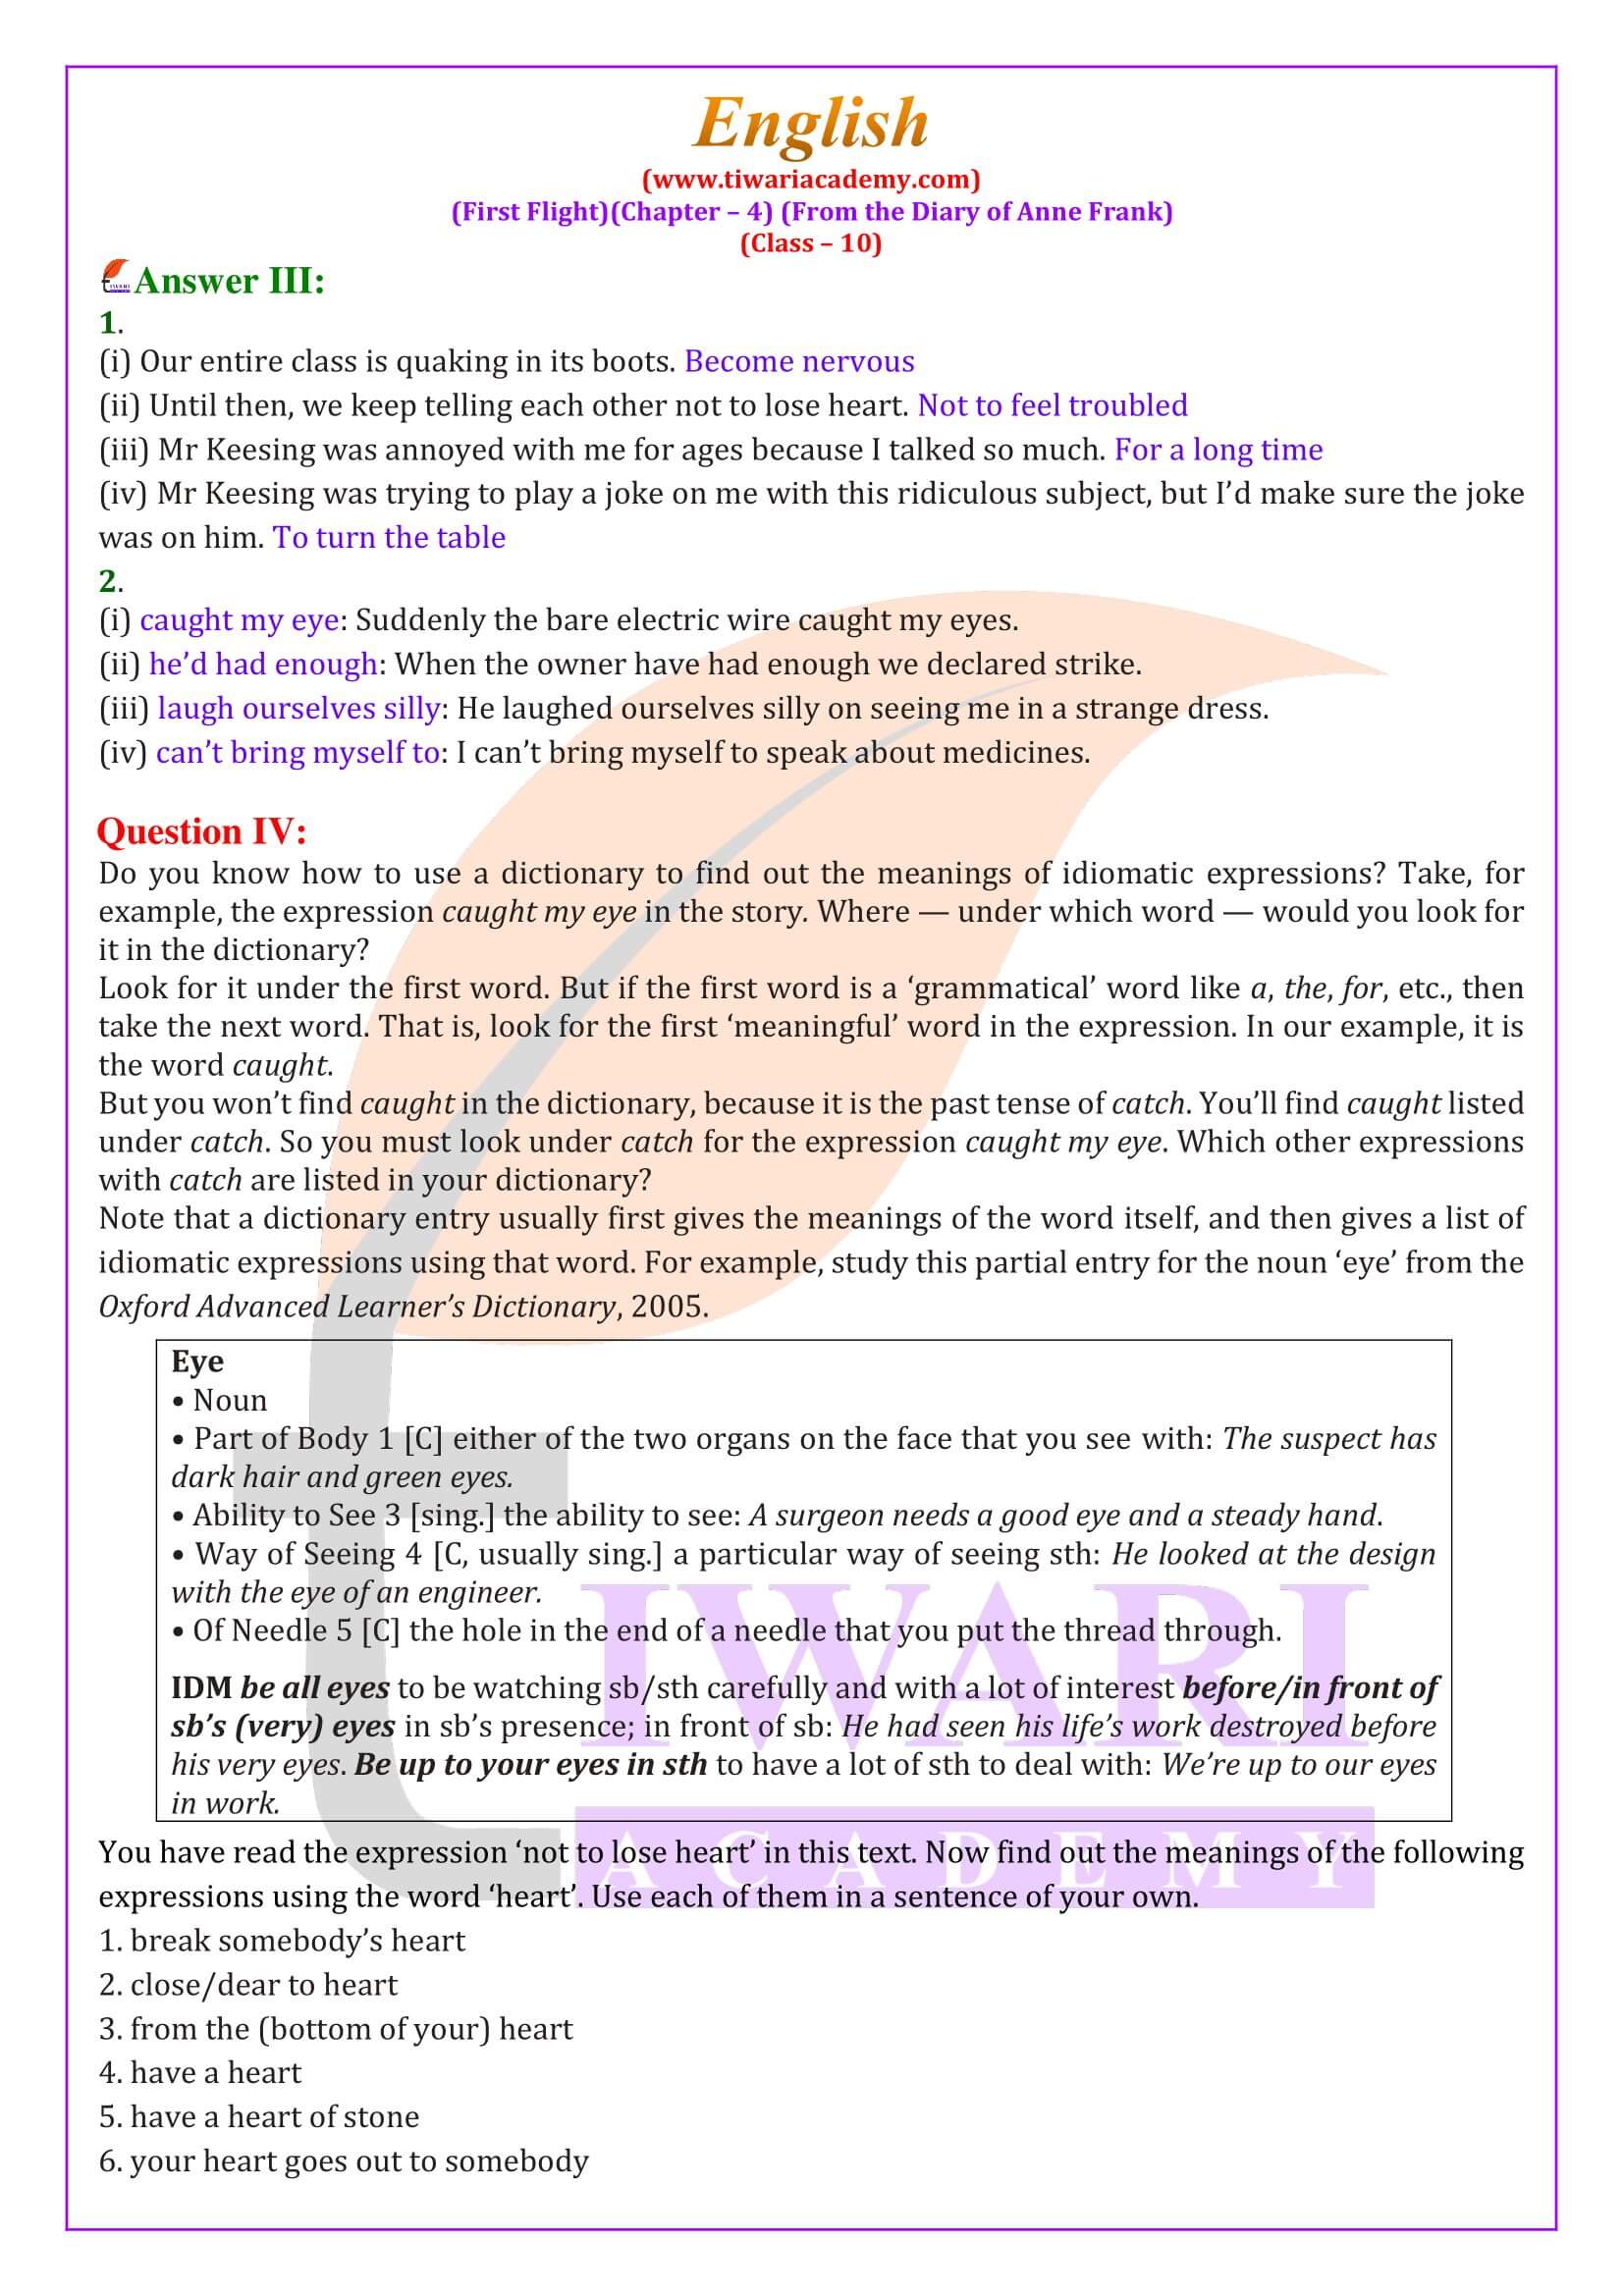 NCERT Solutions for Class 10 English Chapter 4